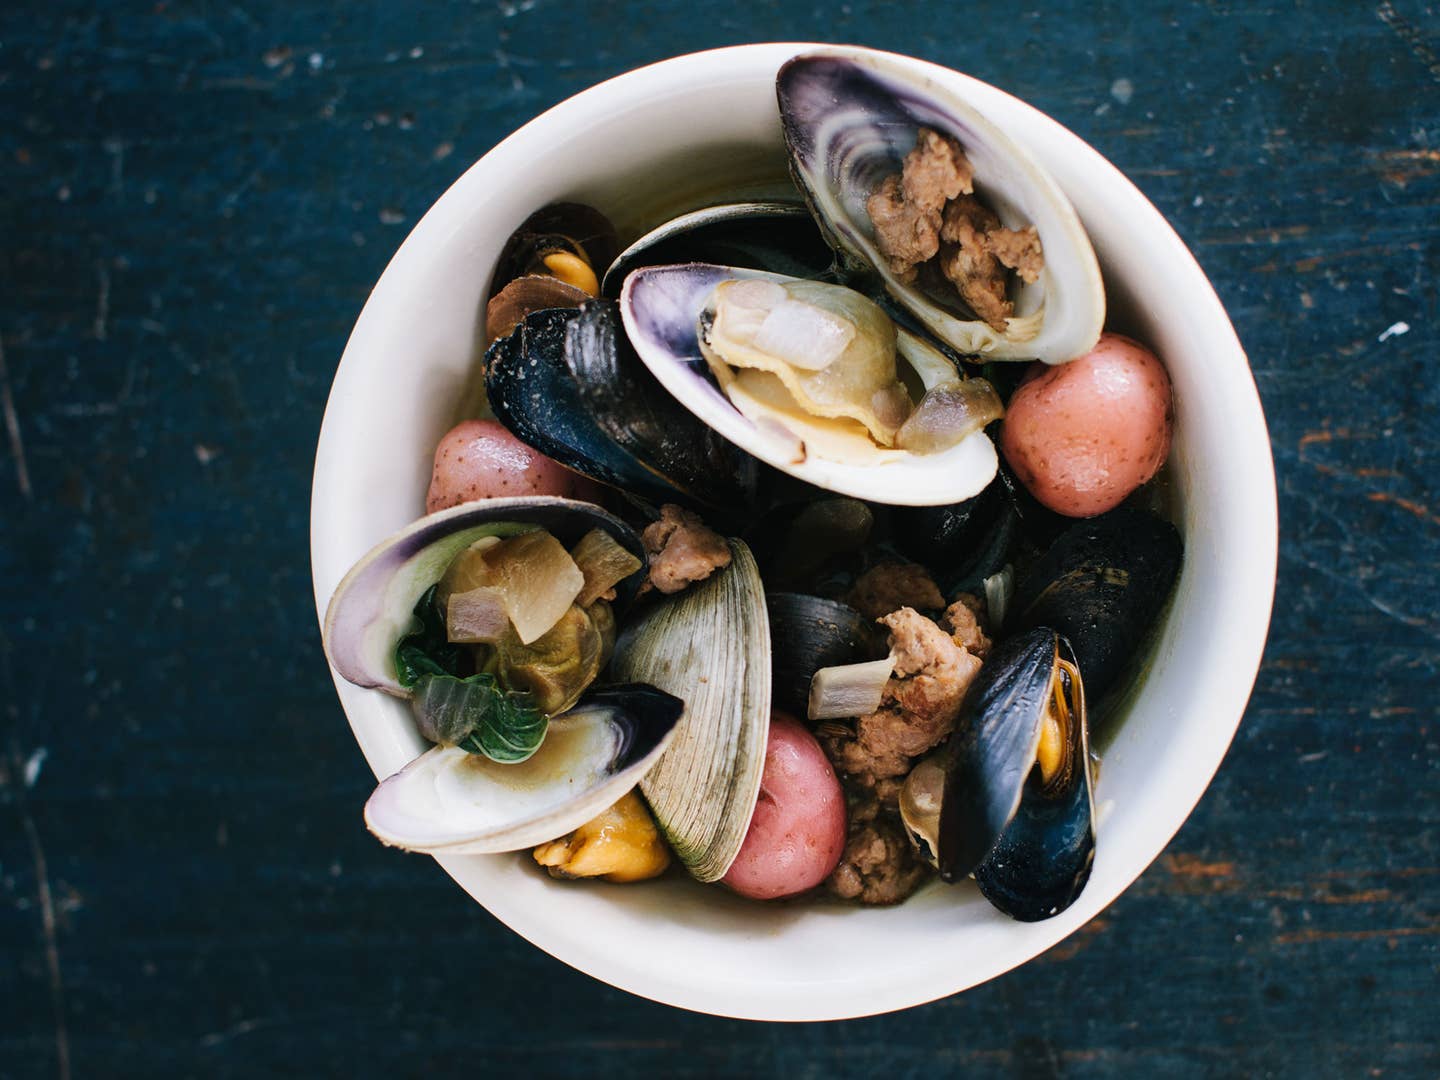 Clams and Mussels with Spicy Pork Sausage Broth